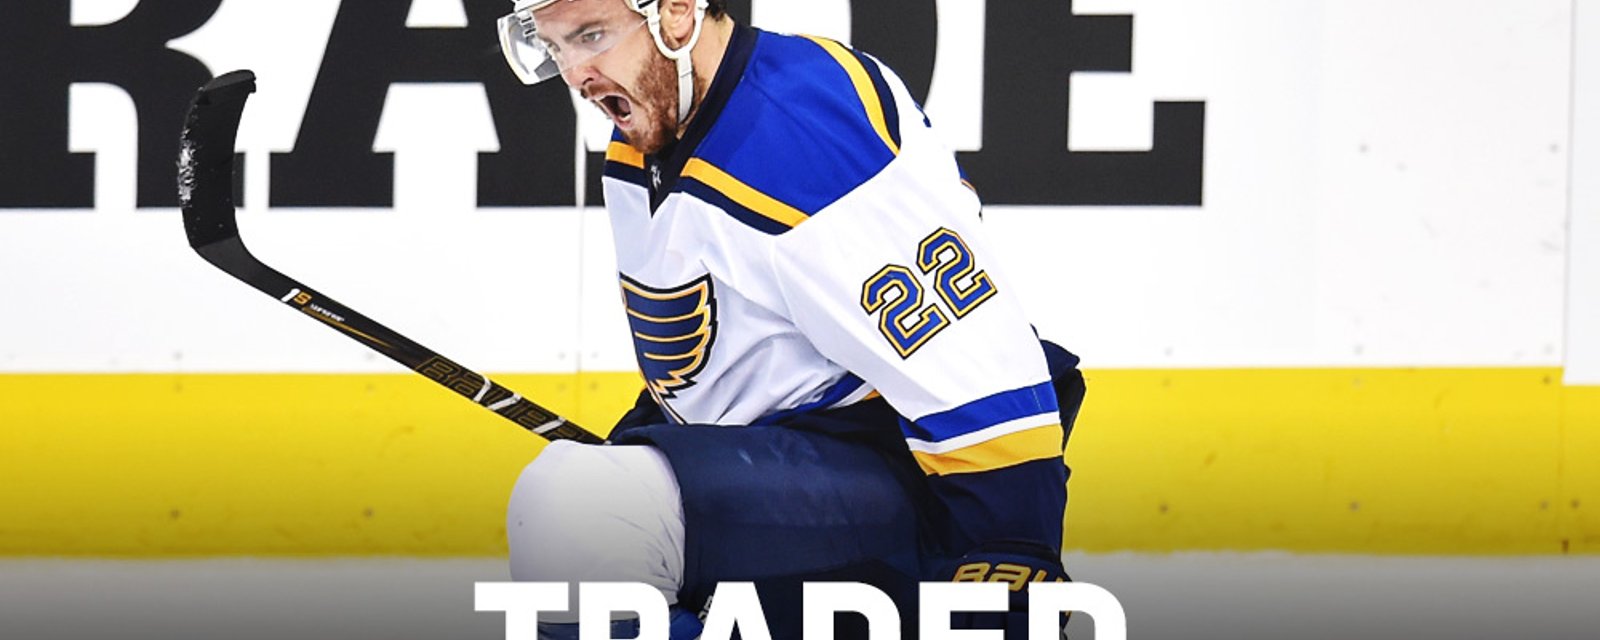 Report: Full details of Shattenkirk trade reveal he came at a massive price!